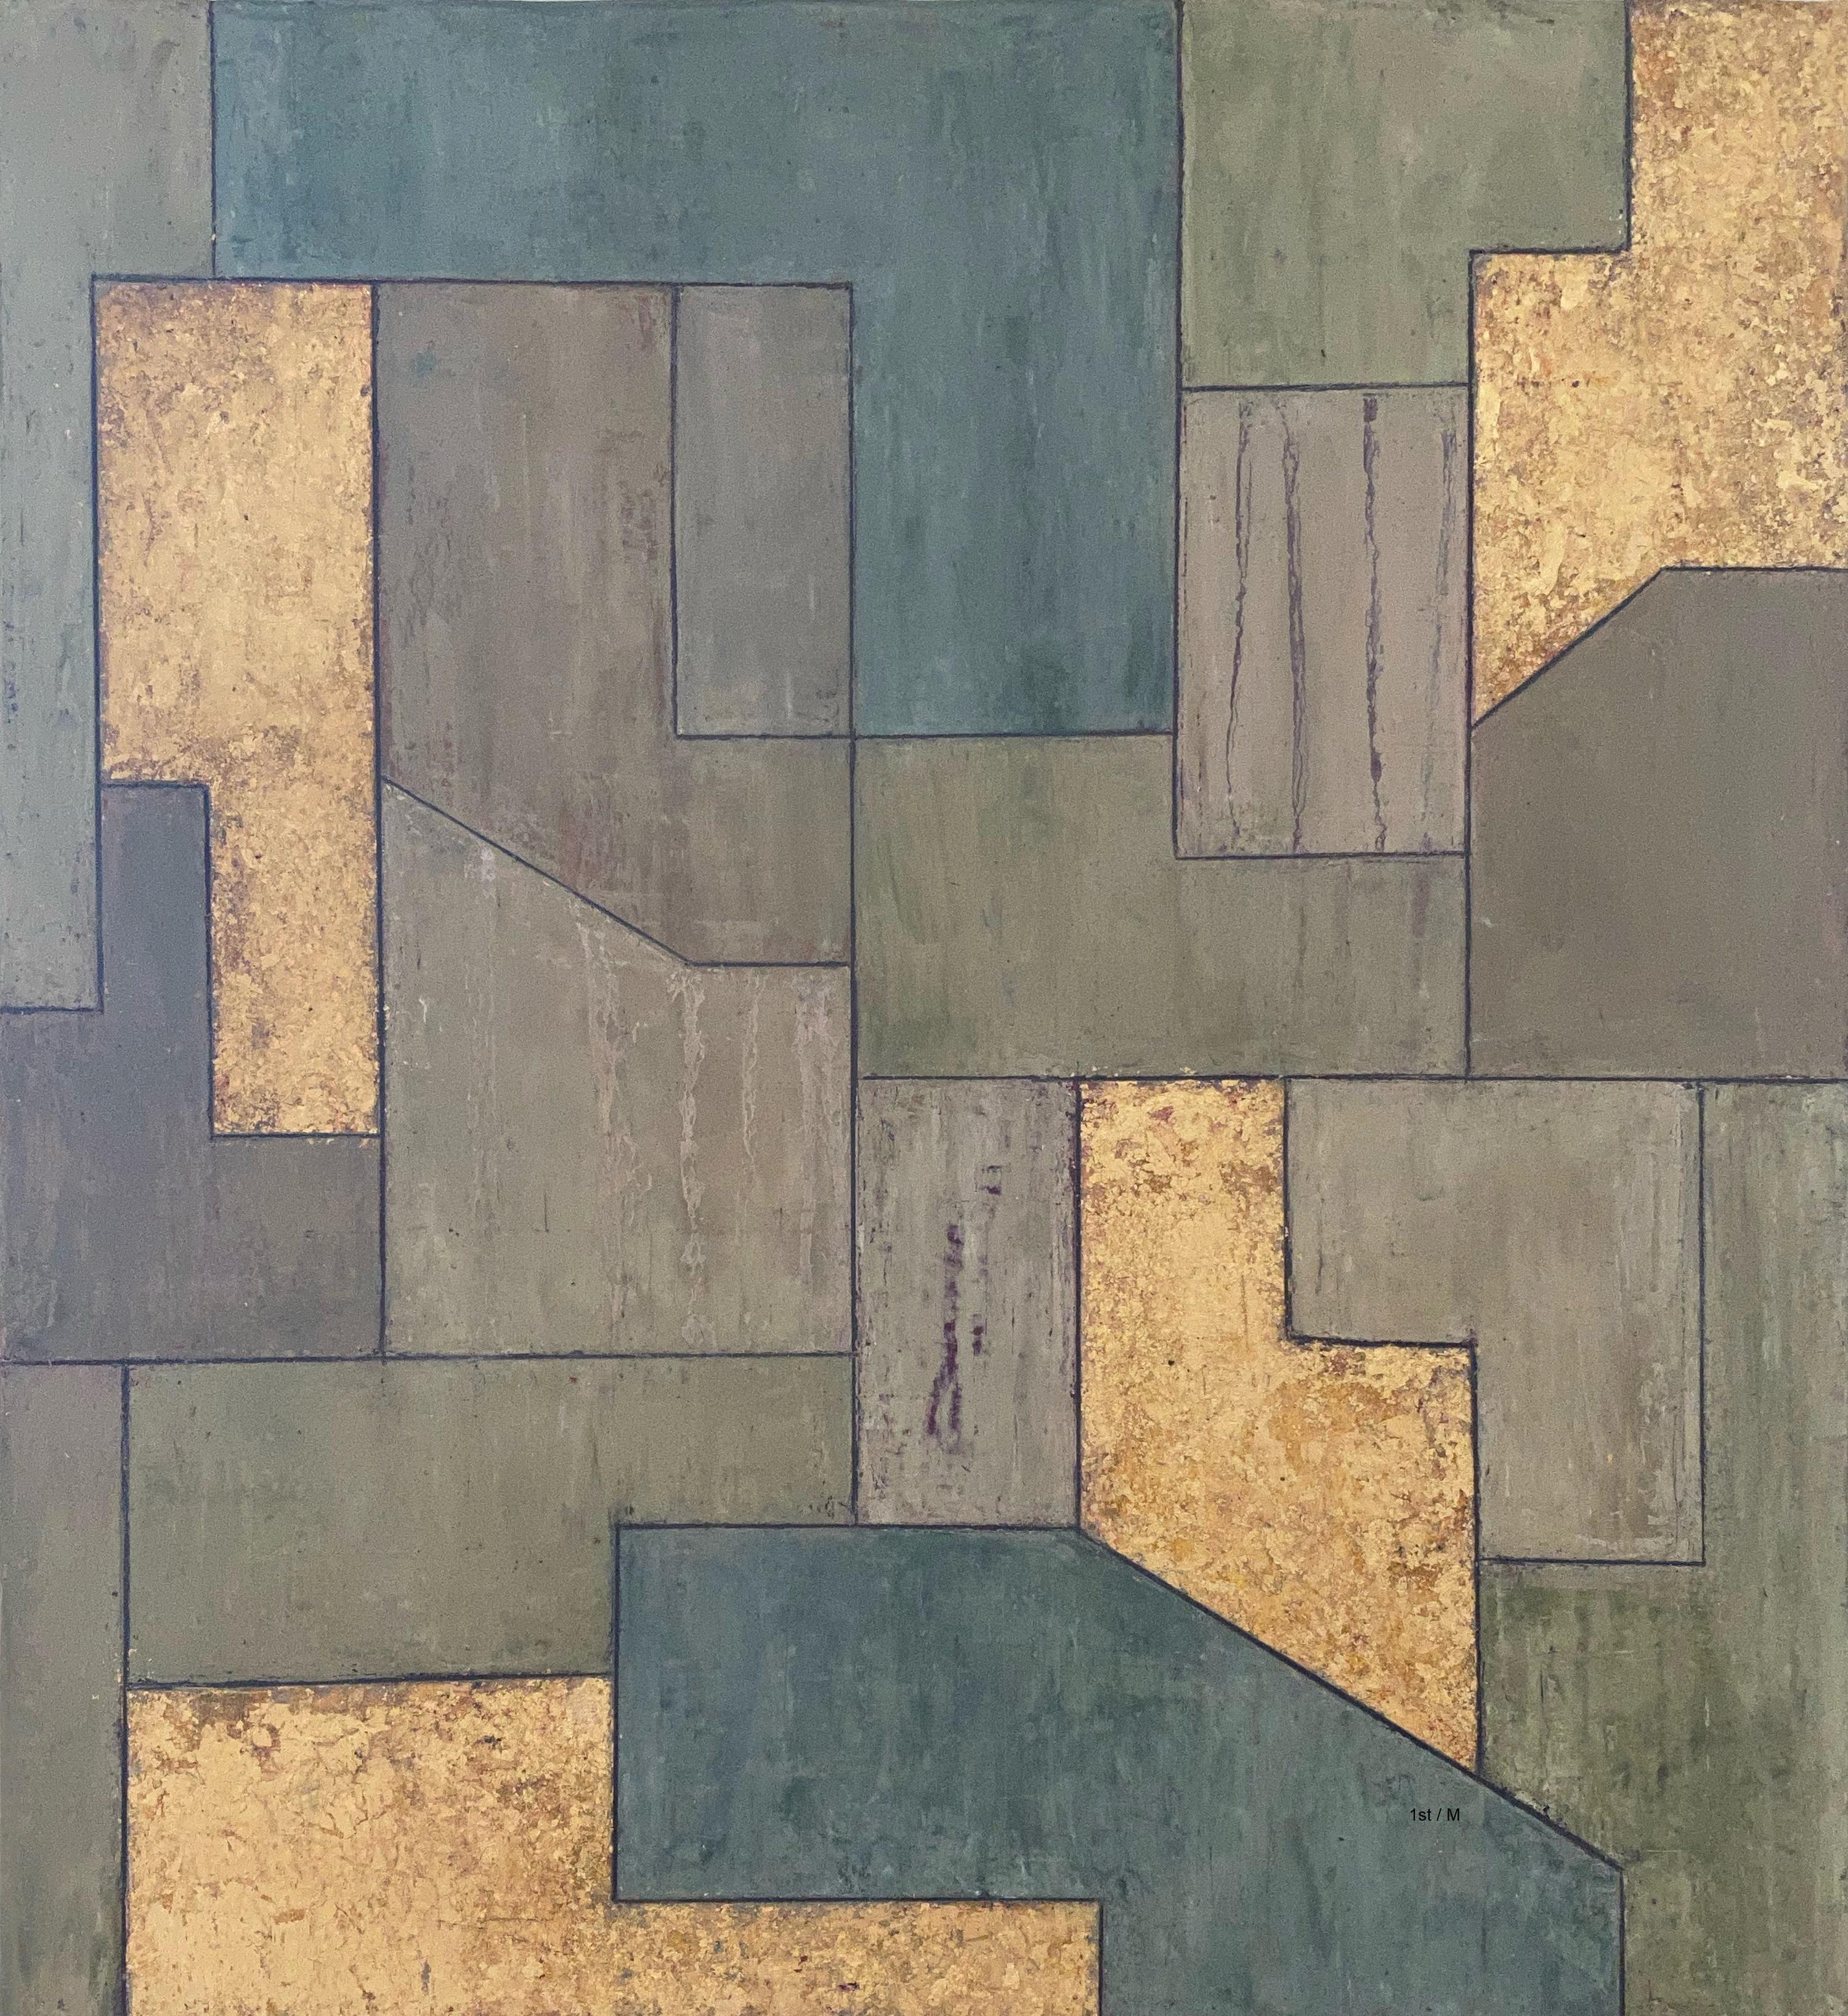 Stephen Cimini Abstract Painting - 24x22x2 in. - Oil, Gold Leaf - Geometric Architectural Contemporary FG